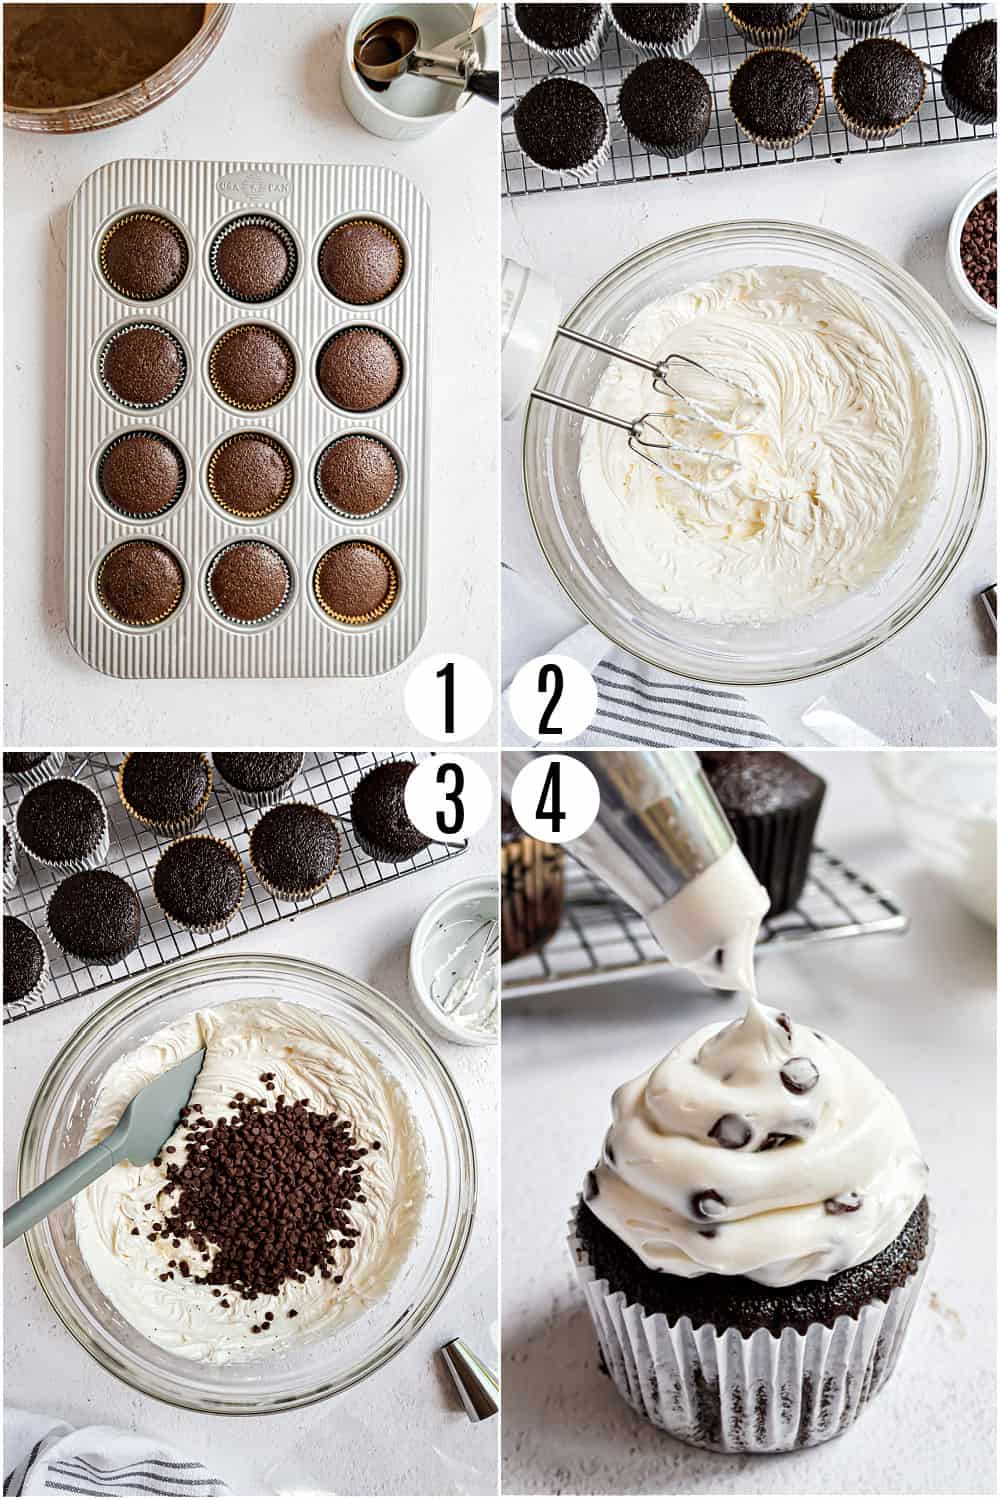 Step by step photos showing how to make cheesecake frosted chocolate cupcakes.